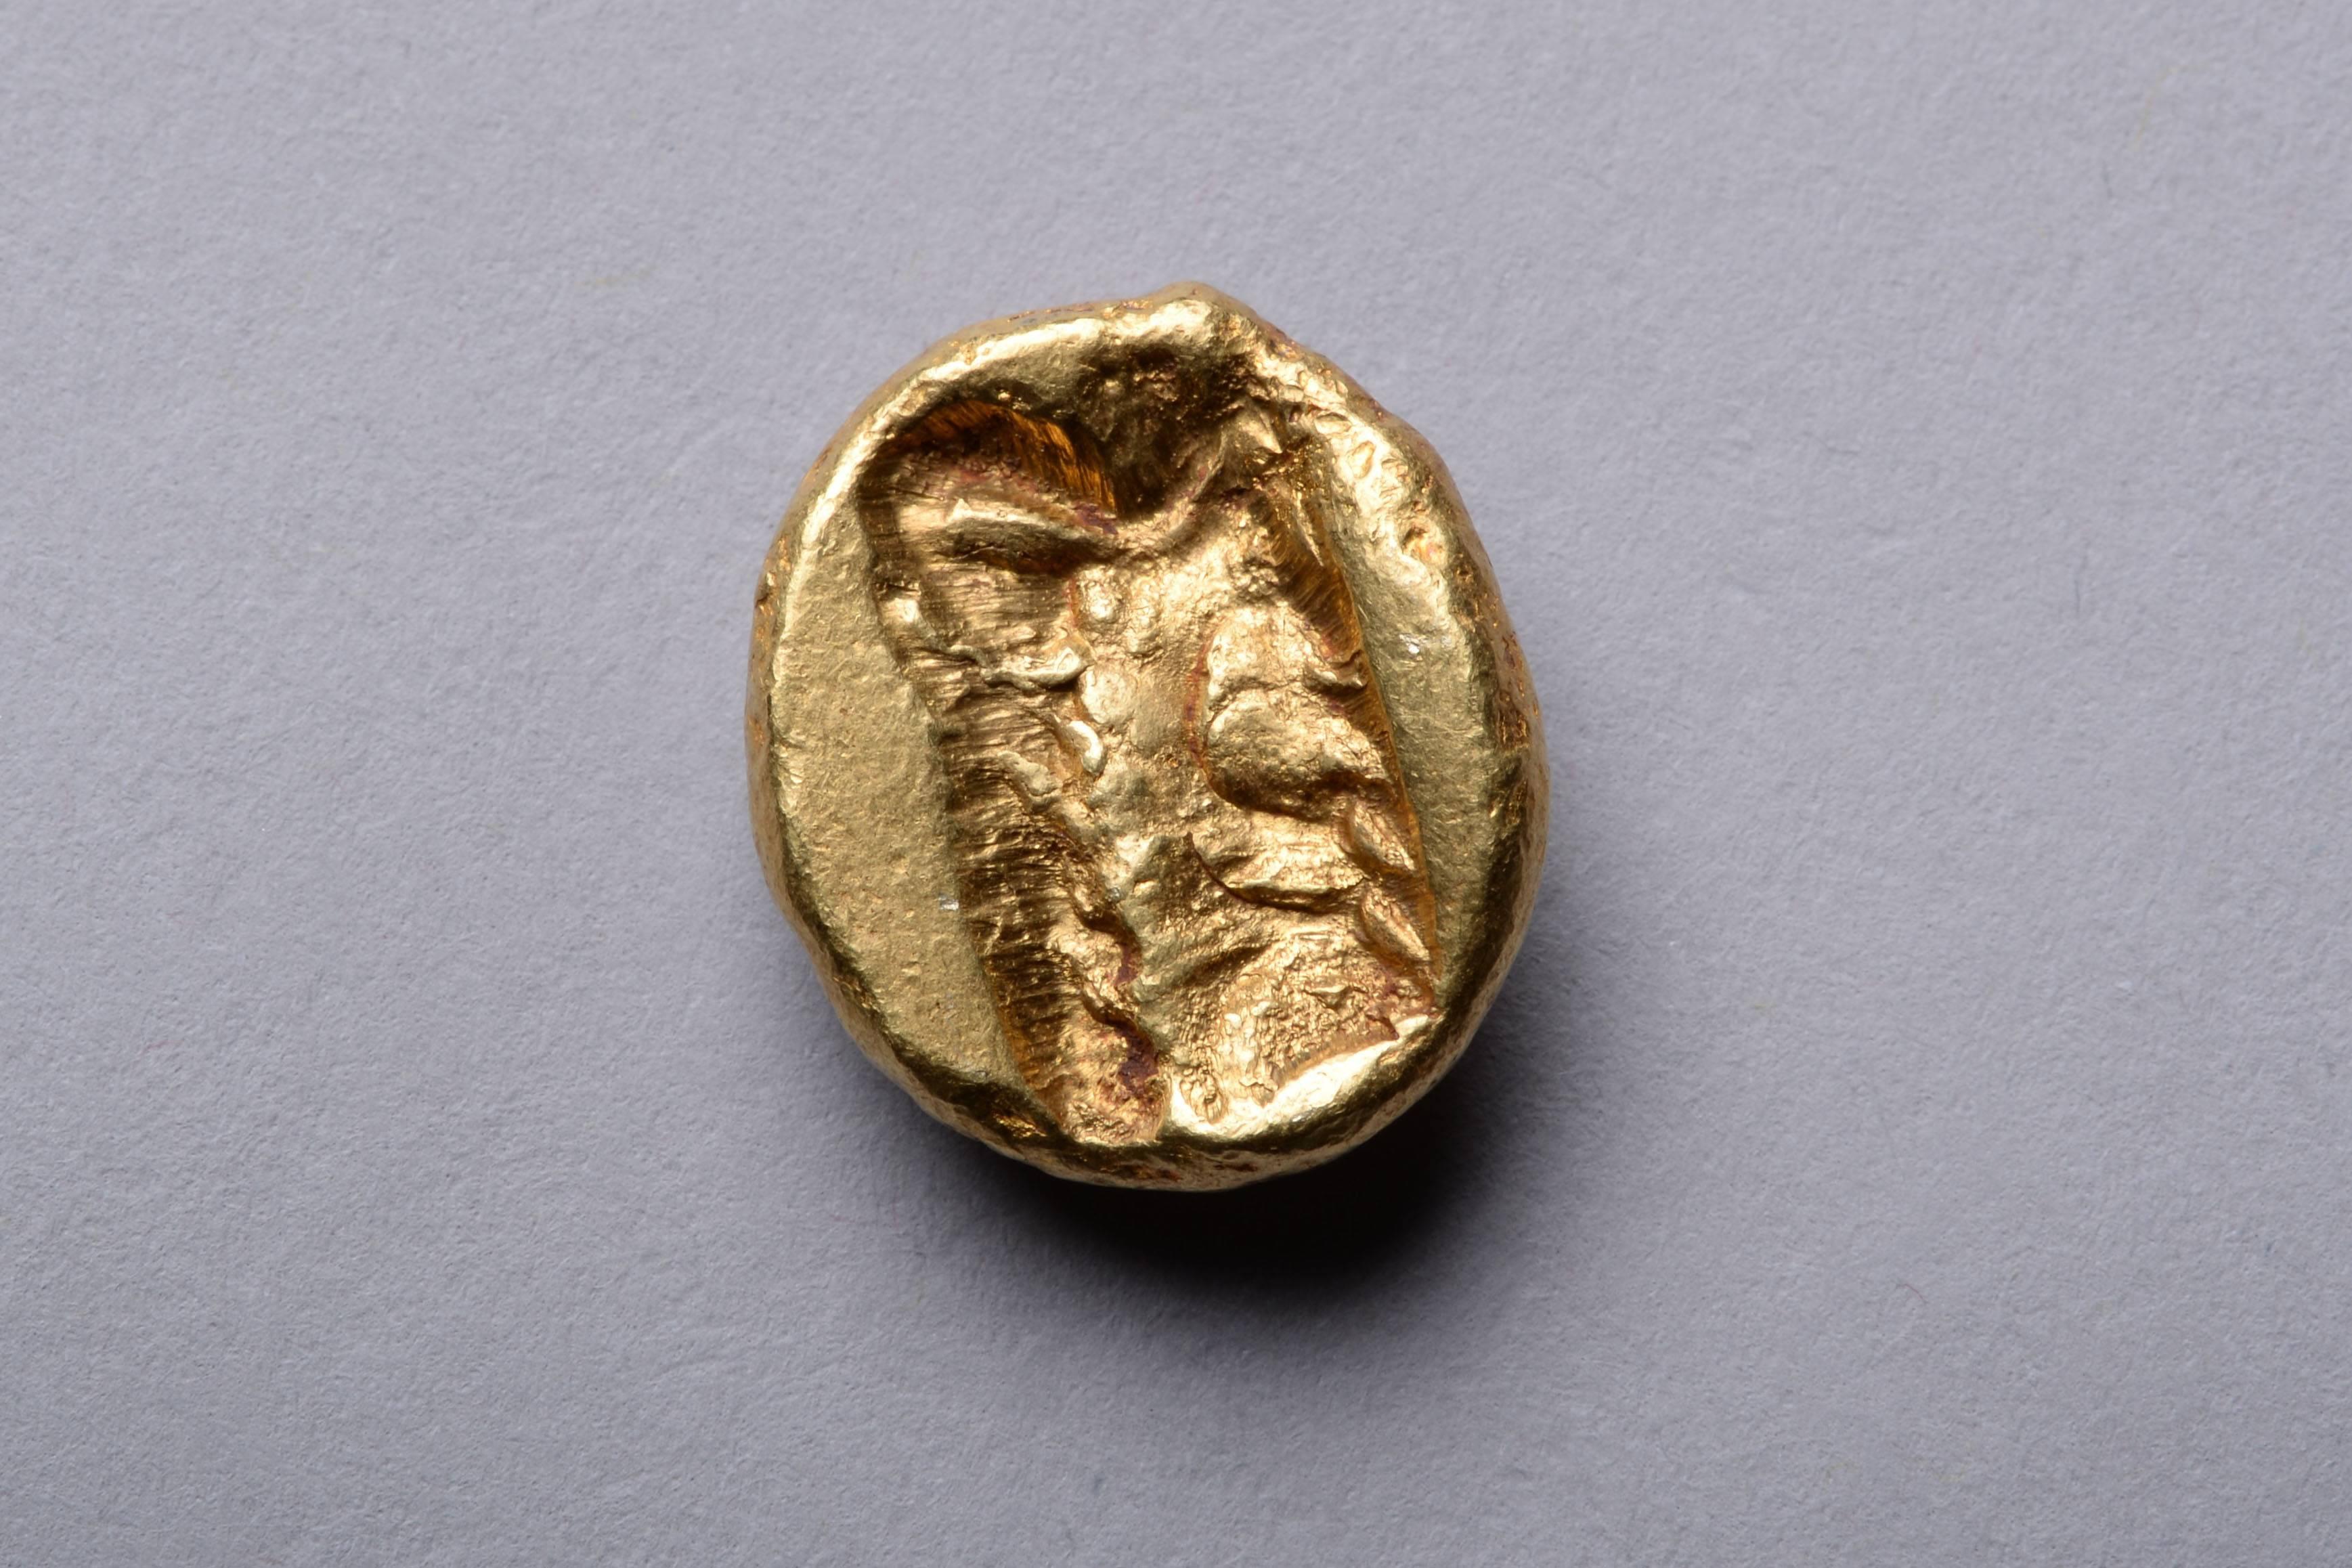 A superb example of an ancient Persian gold daric. Minted by the Achaemenid Empire, under King Xerxes II or Artaxeres II, circa 420 - 375 BC, at the Sardes mint. 

The obverse with a beautiful and highly naturalistic depiction of the Great King of